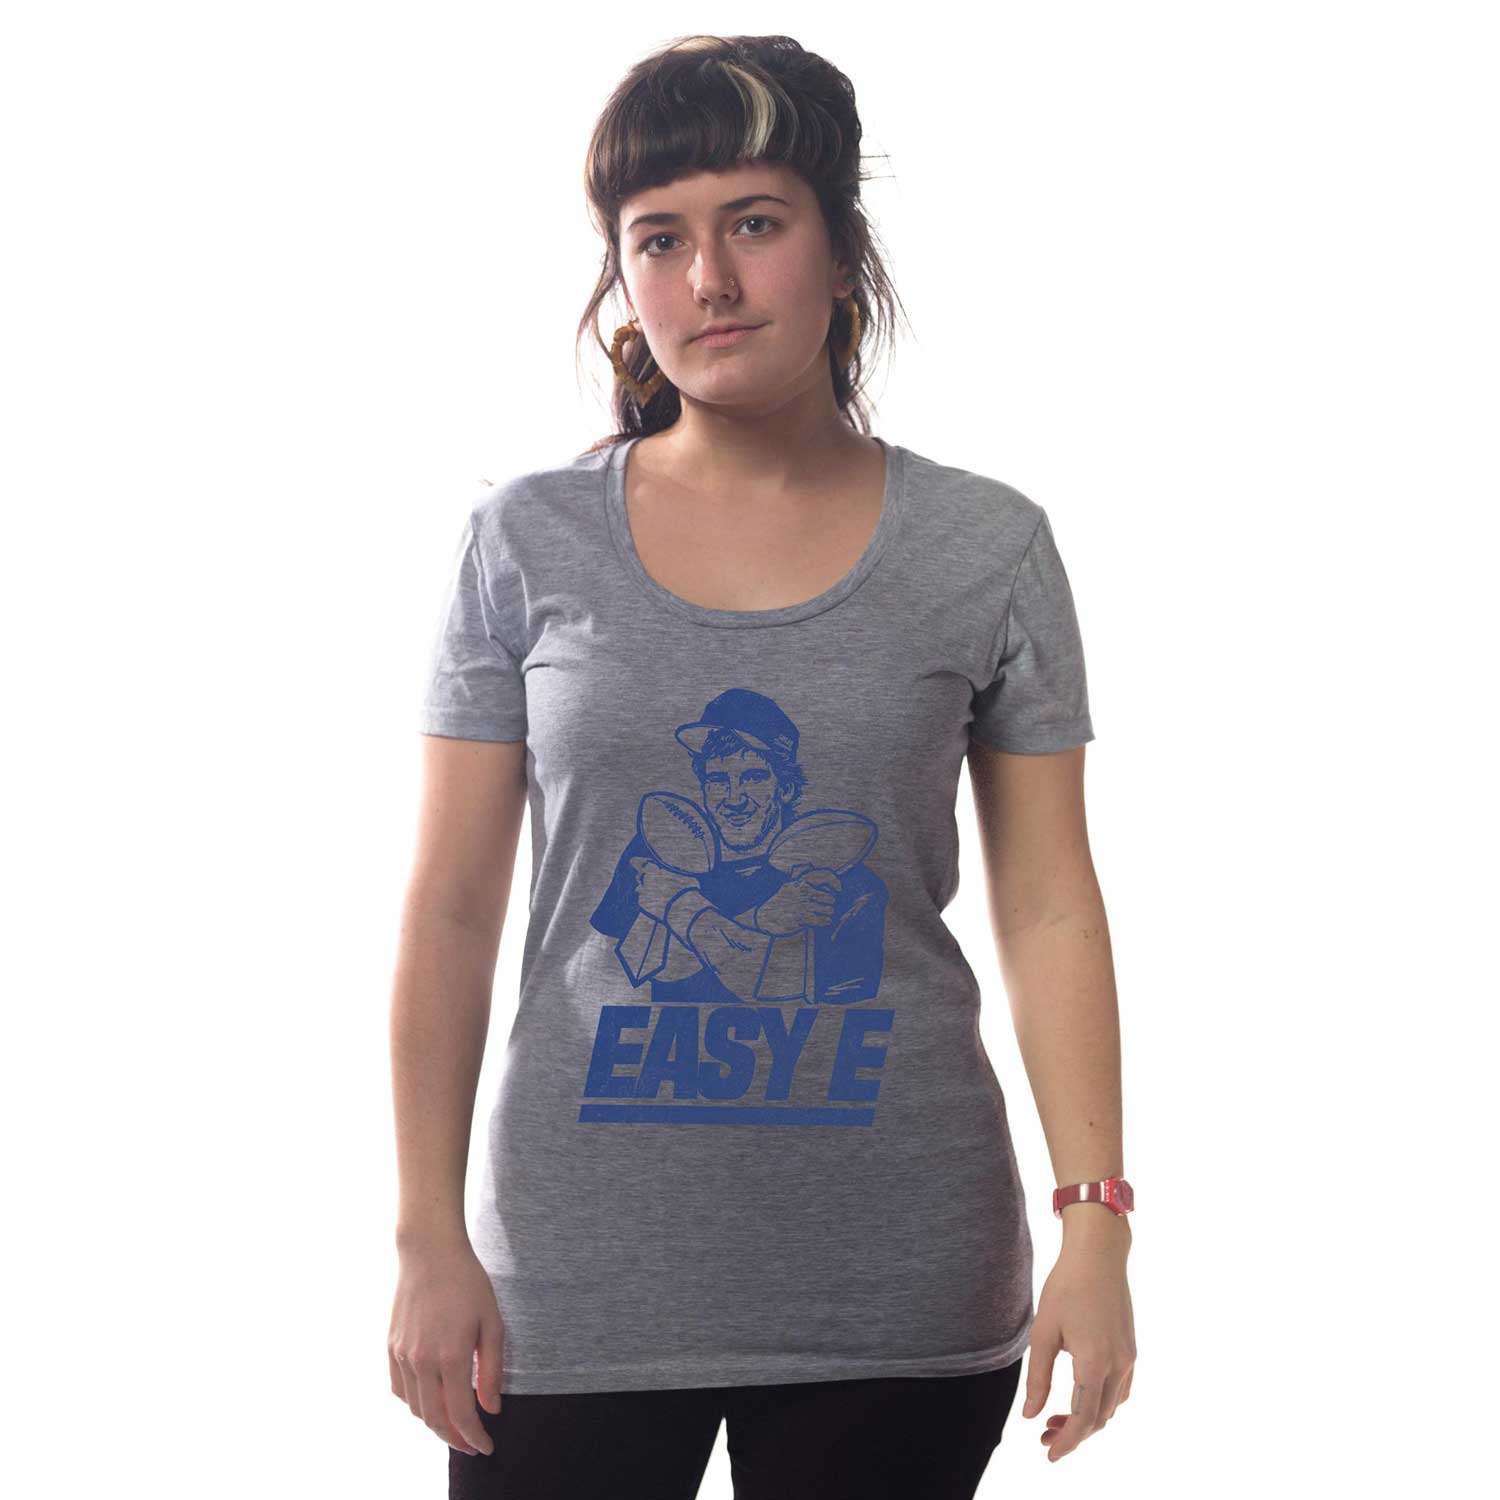 Women's Easy E Funny Graphic Tee | Vintage NY Giants Eli Manning T-Shirt on Model | SOLID THREADS